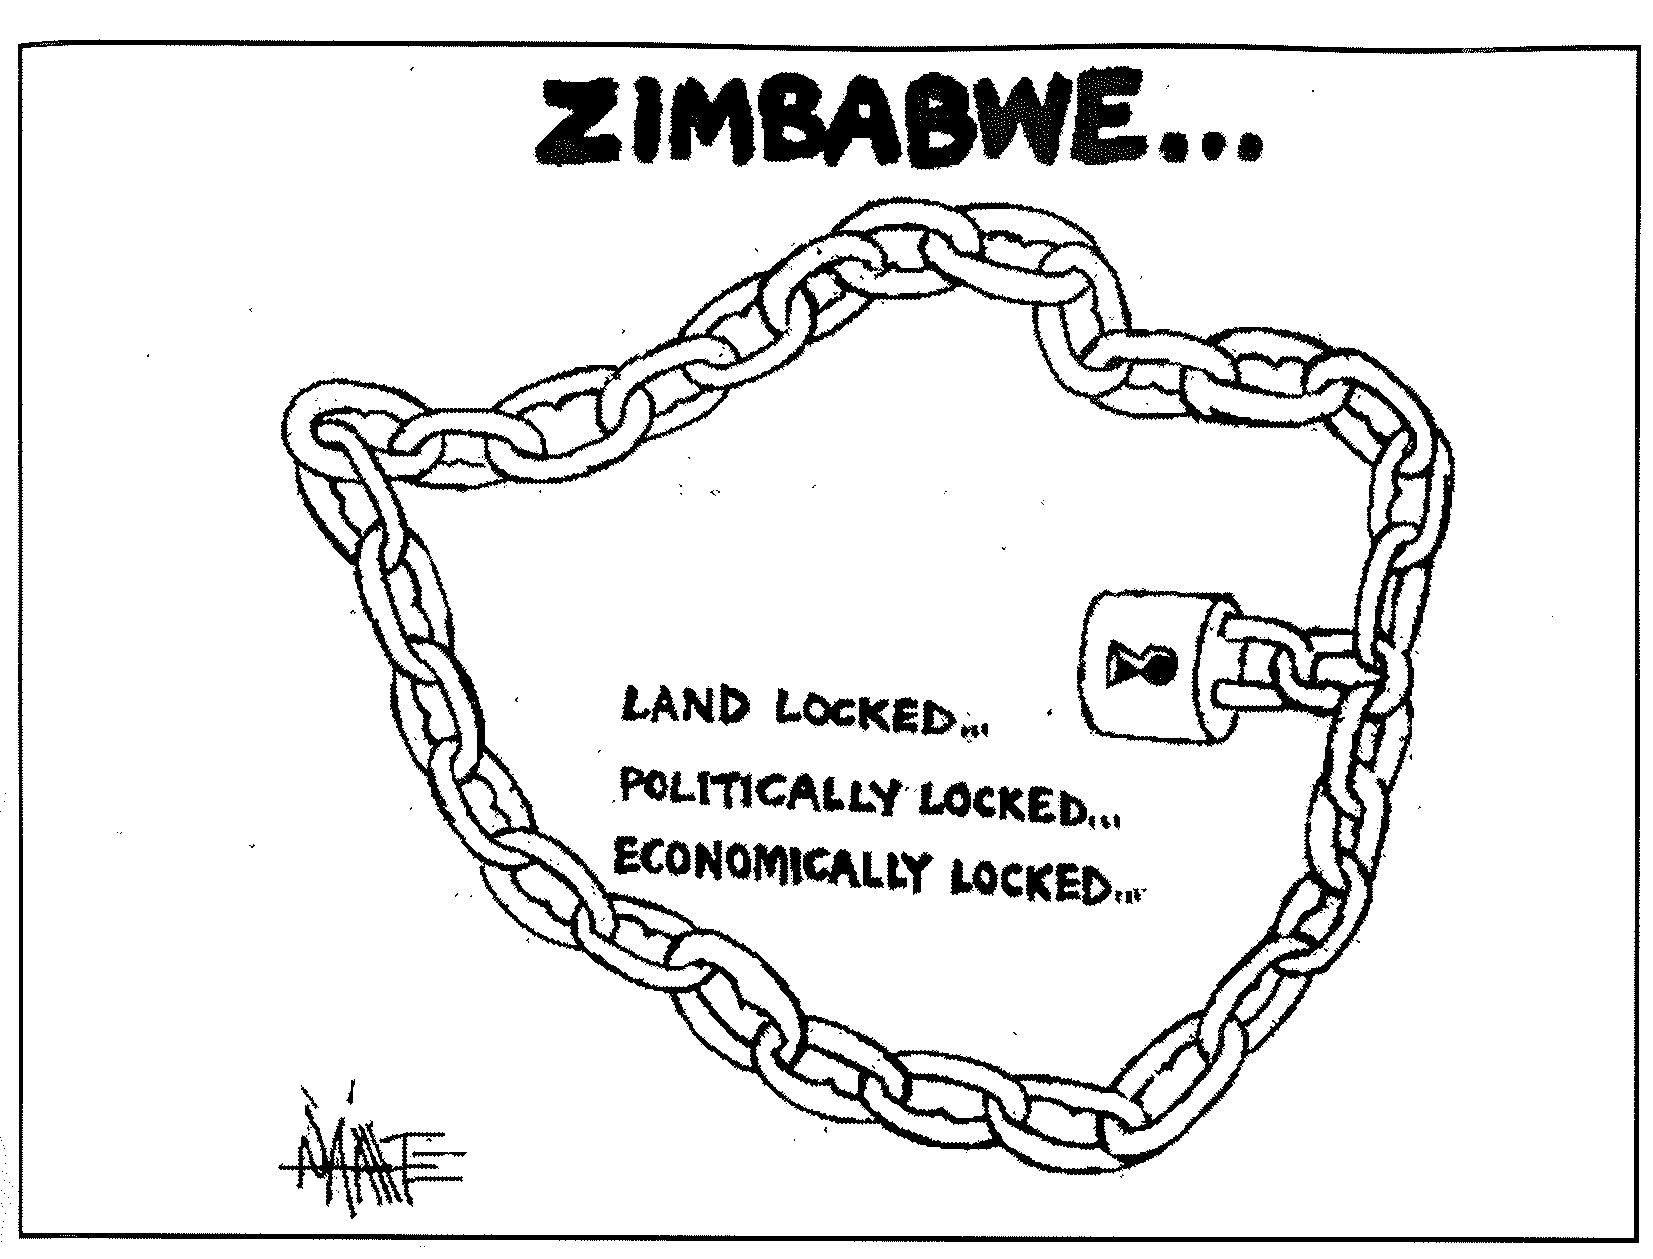 Tony Namate's cartoon, which originally appeared in the Zimbabwe Independent in November 2002